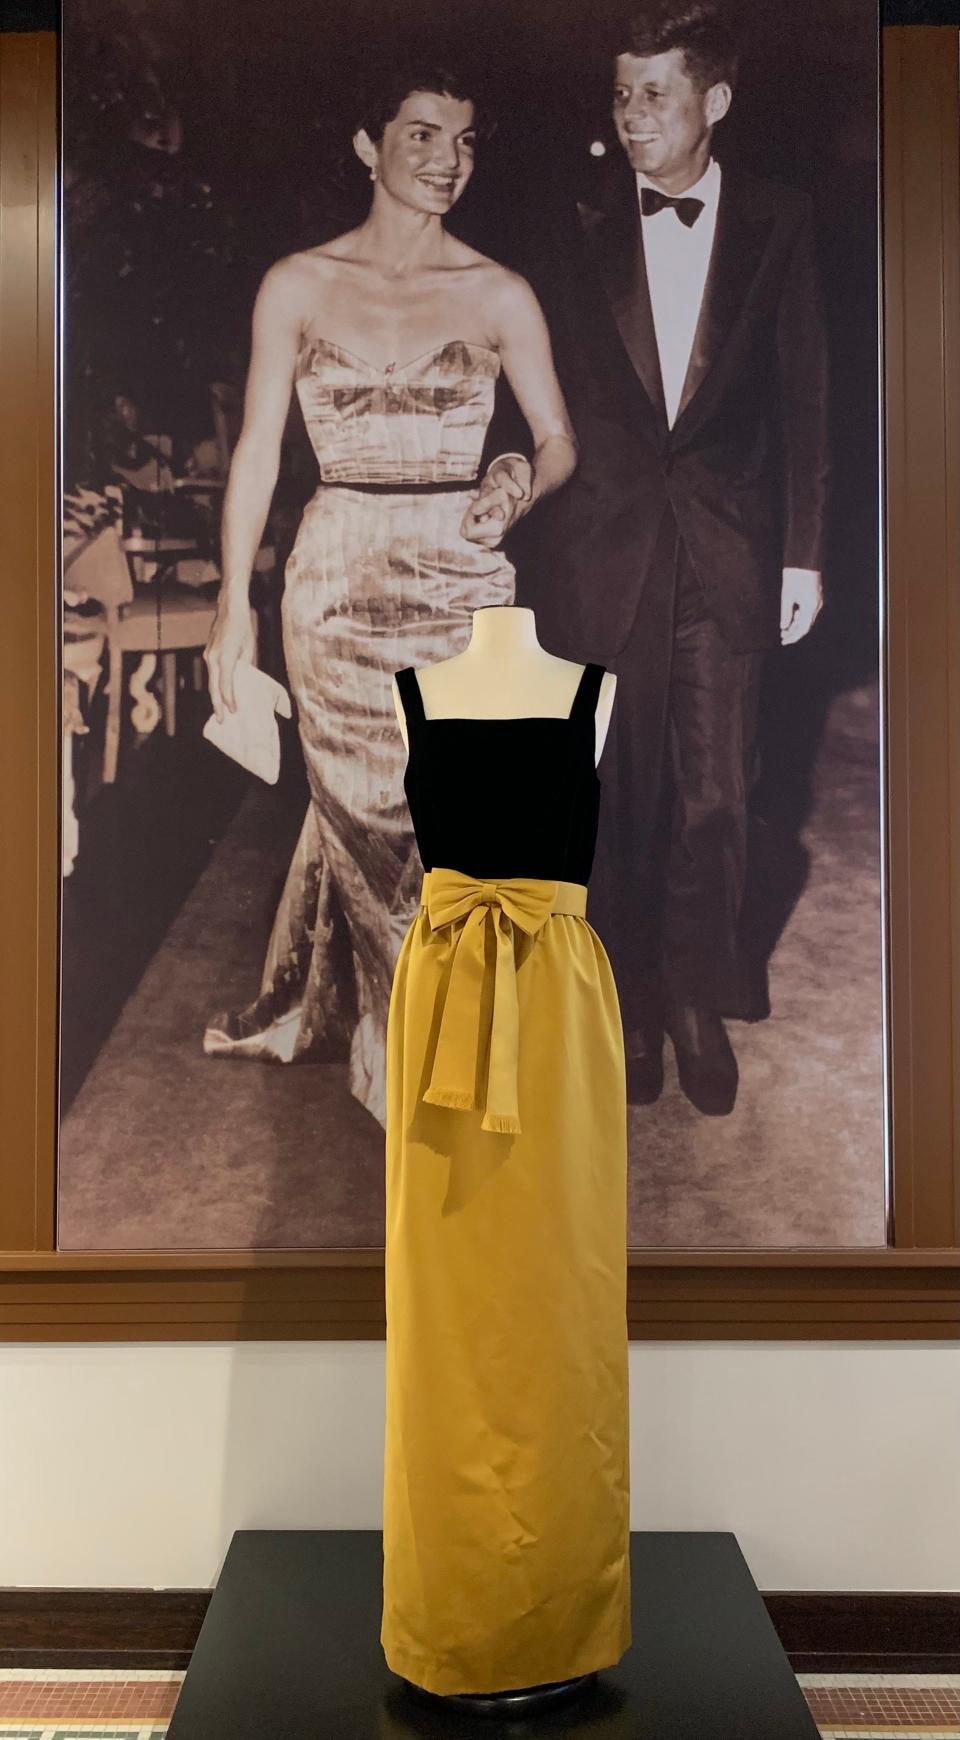 The Kennedys brought "Camelot" to Palm Beach. In the Bert Morgan photo on display, Jacqueline and John F. Kennedy are out on the town, probably in the late 1950s. The yellow-and-black gown is a reproduction of a Chez Ninon dress the first lady wore to a state dinner in 1961.